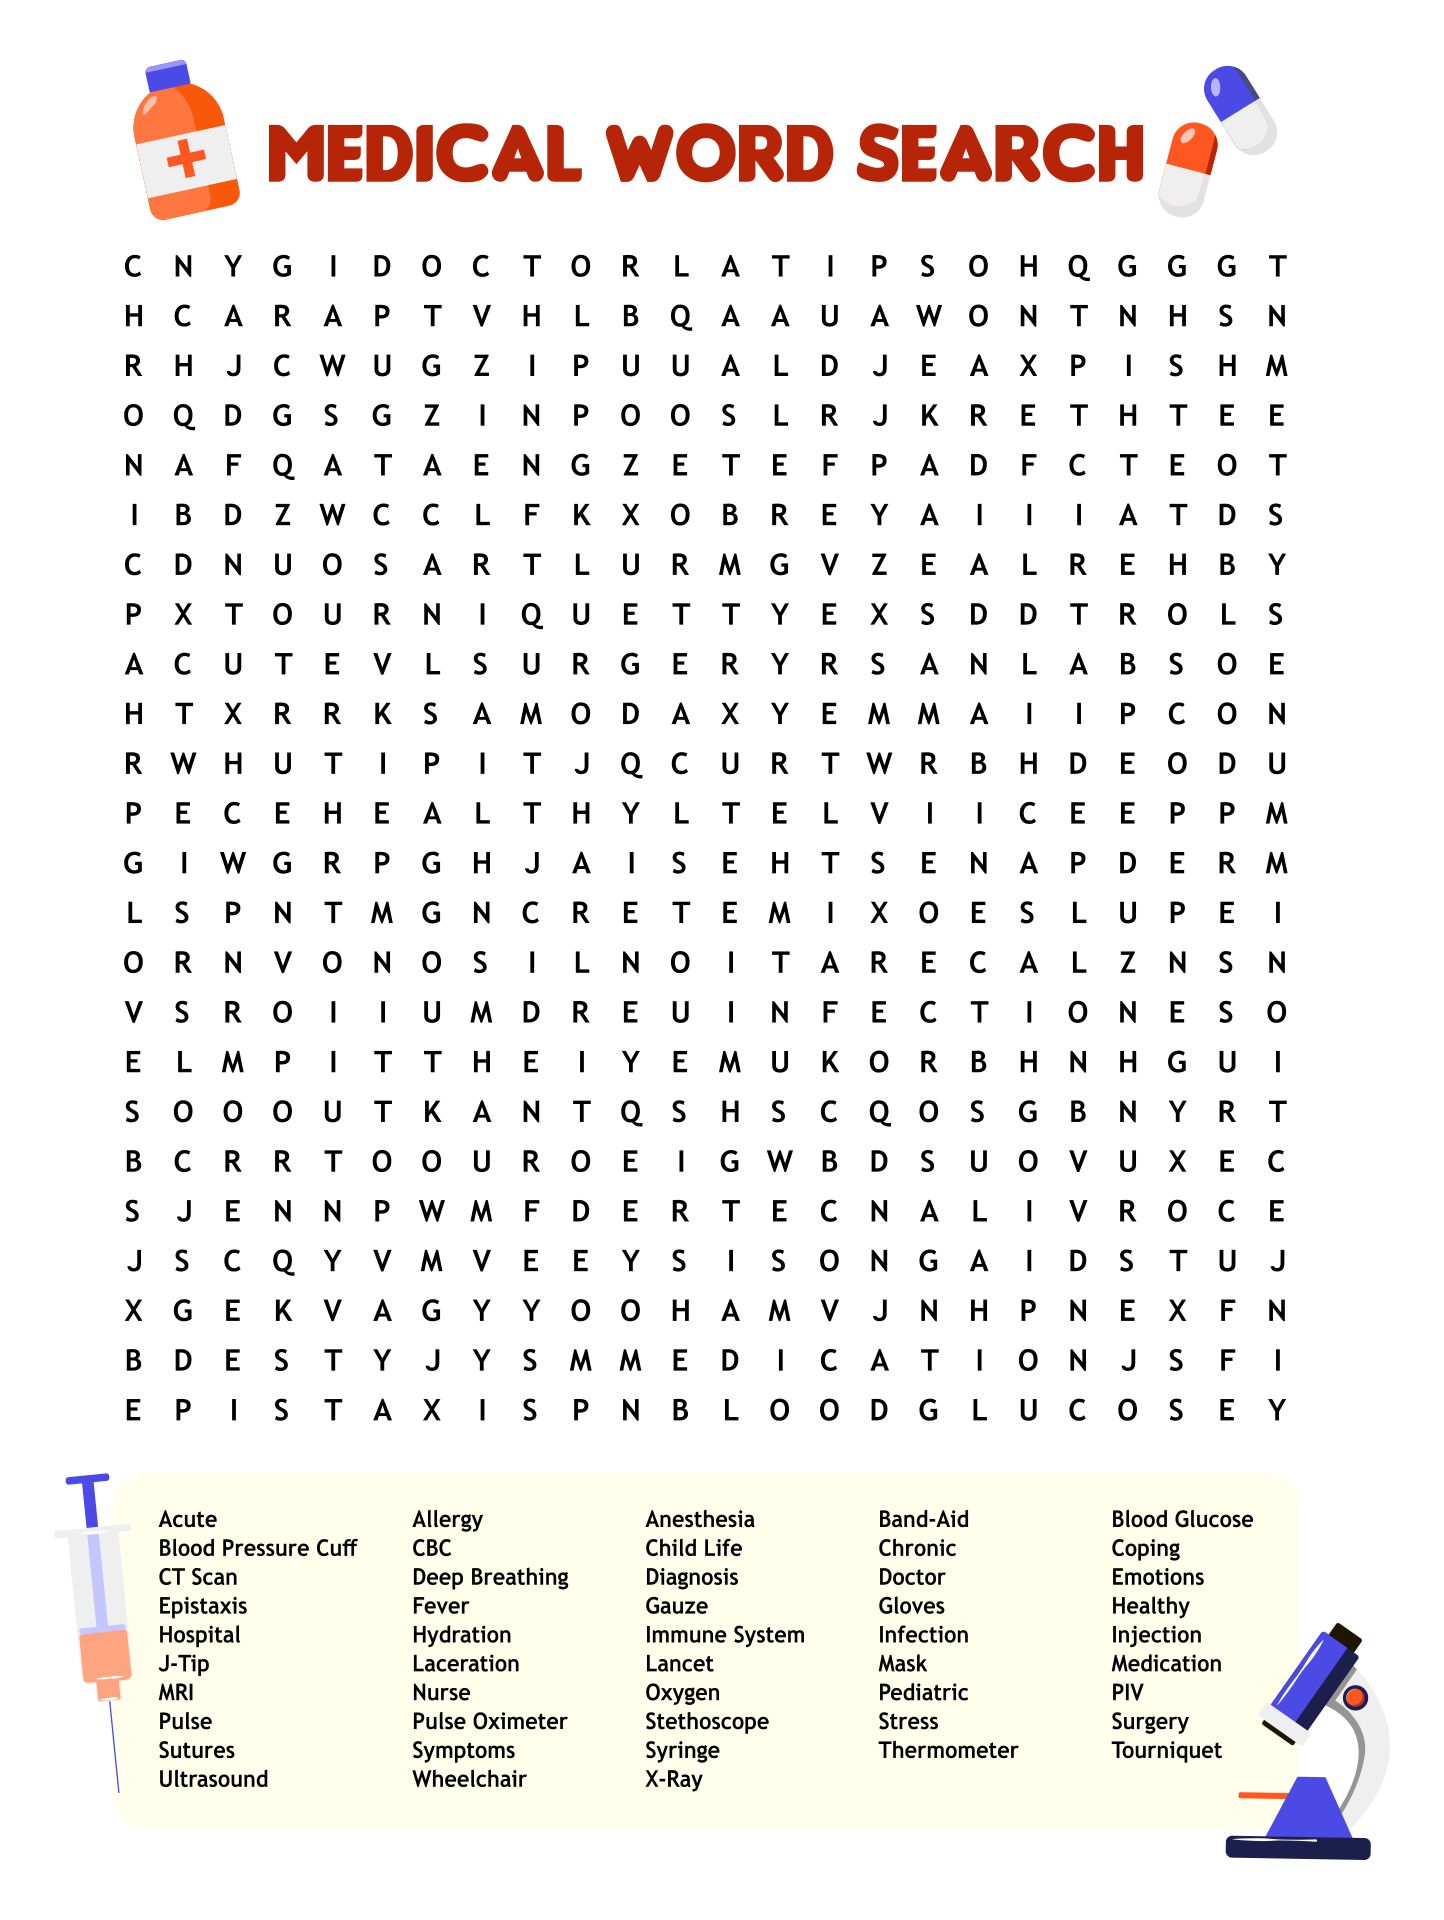 6-best-images-of-medical-word-search-puzzles-printable-medical-word-search-puzzles-dental